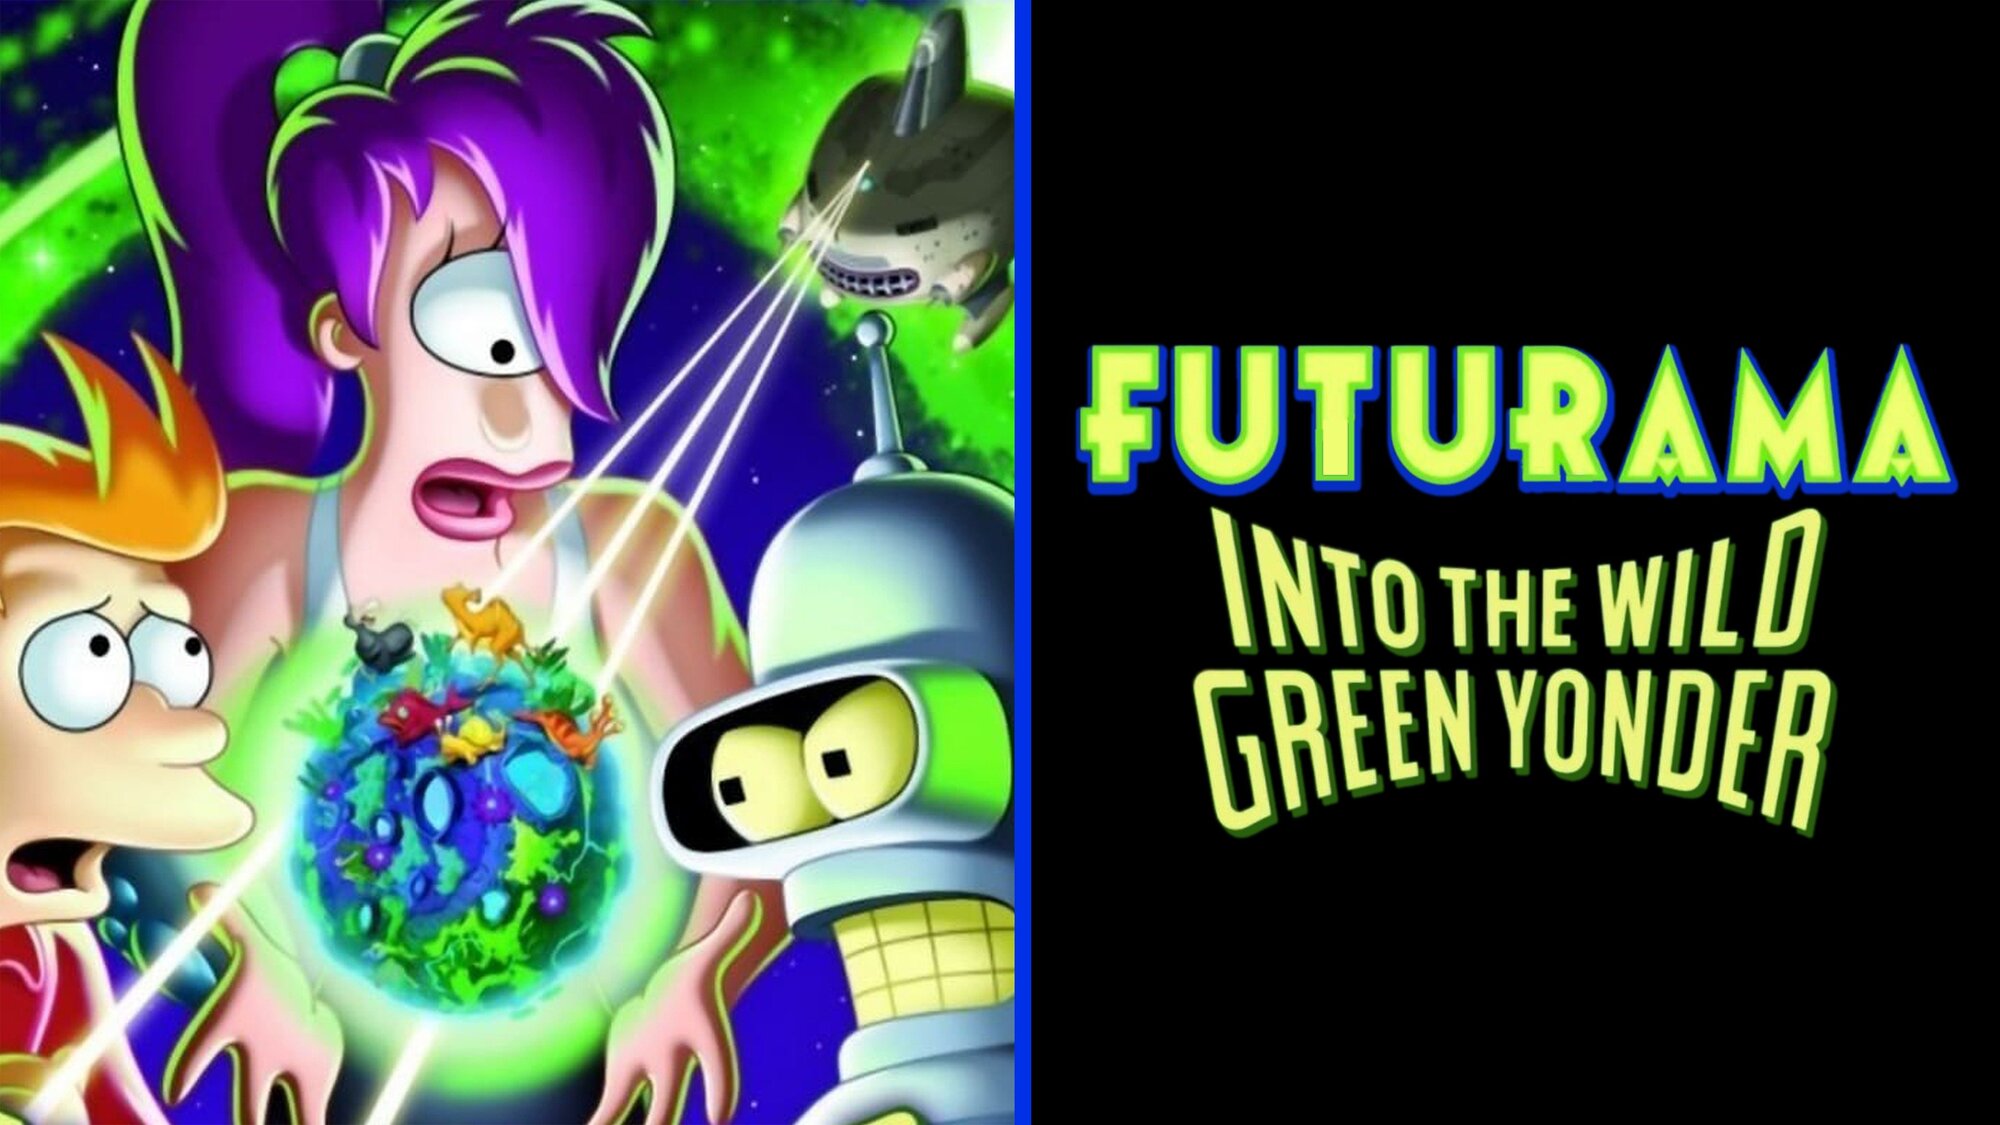 45-facts-about-the-movie-futurama-into-the-wild-green-yonder